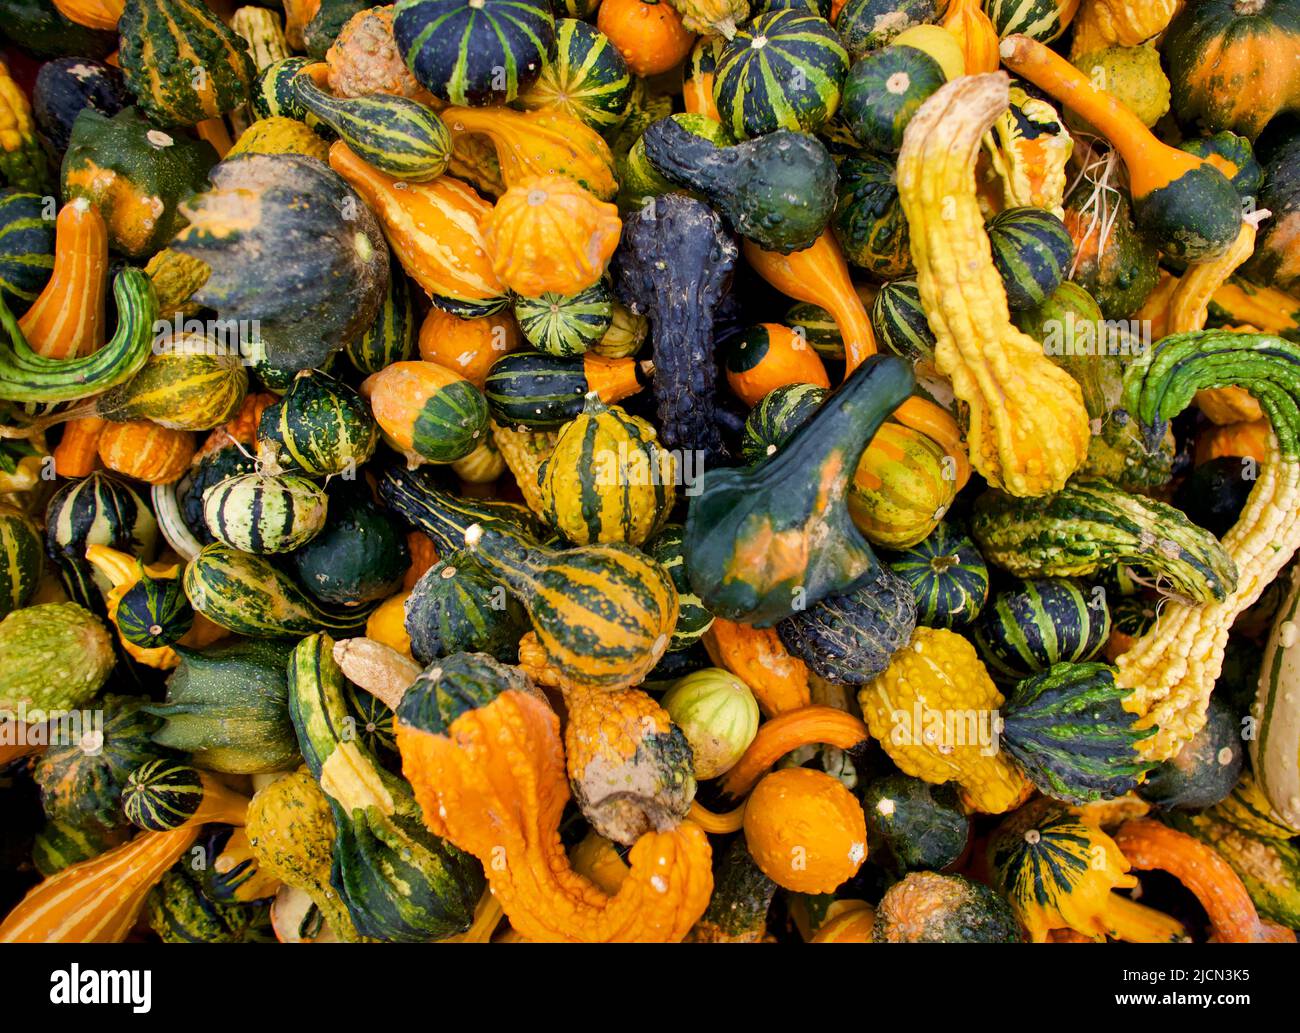 Decorative gourds at farmers market in New Jersey, USA  Full frame, solid background of gourds. Stock Photo